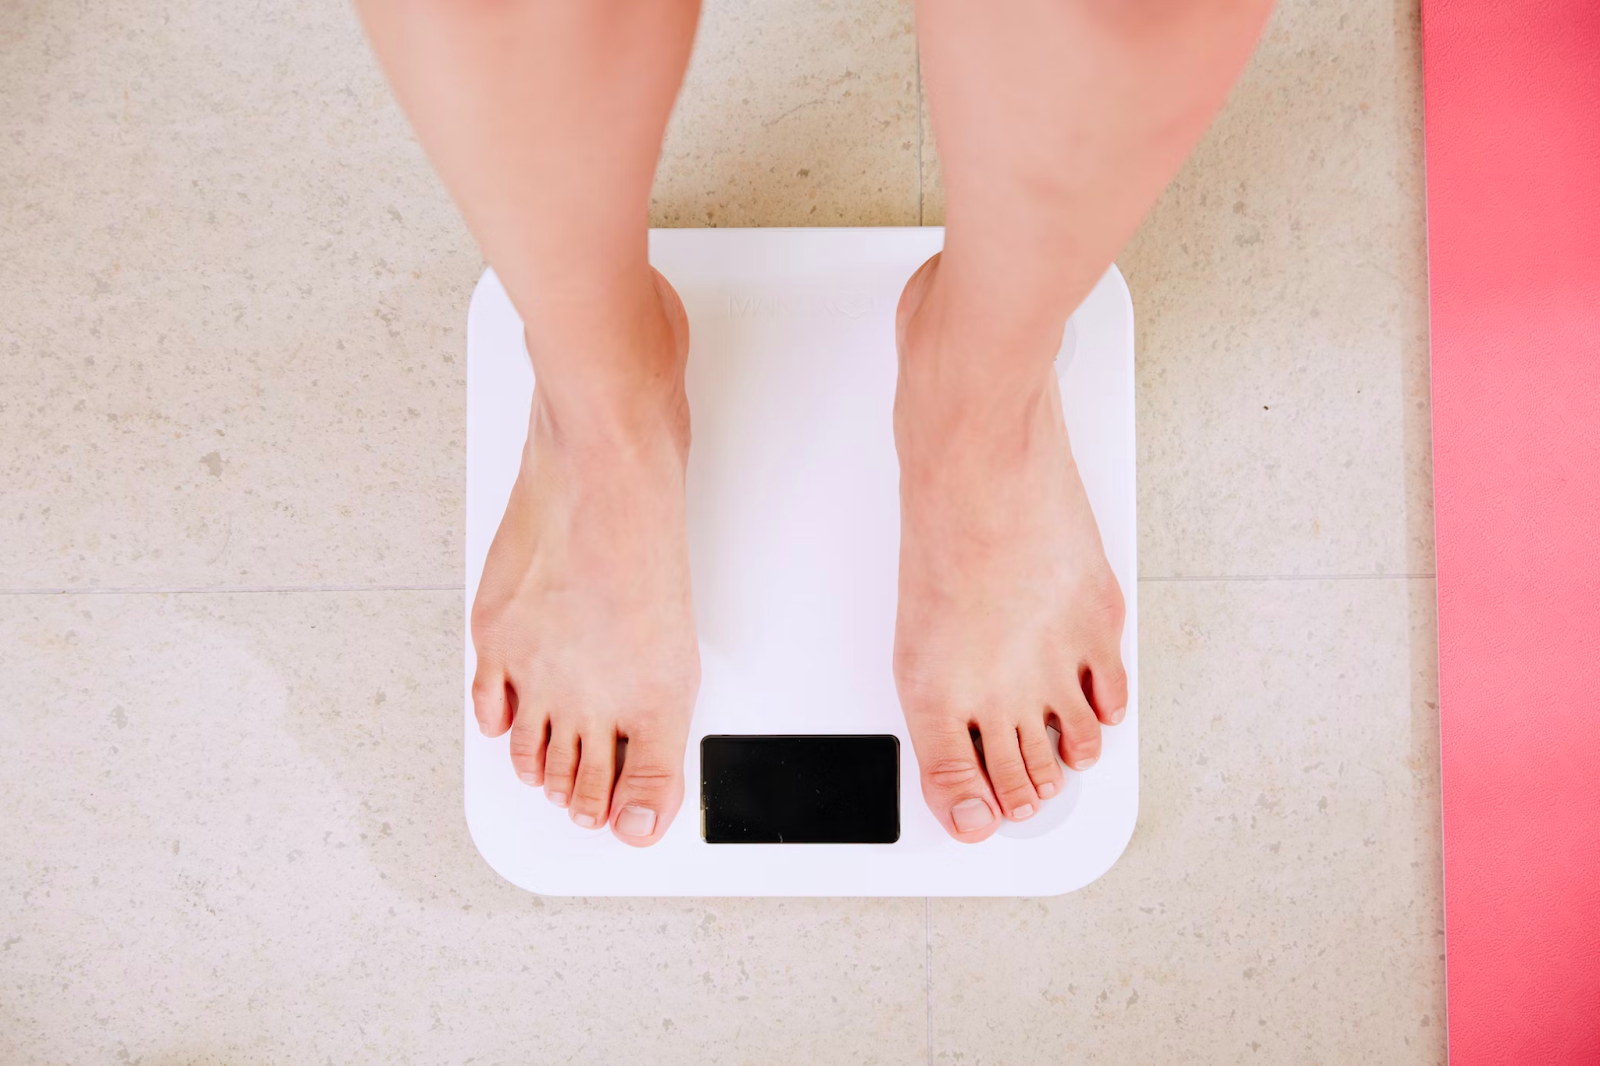 Person steps on scale after using strength training for weight loss program.